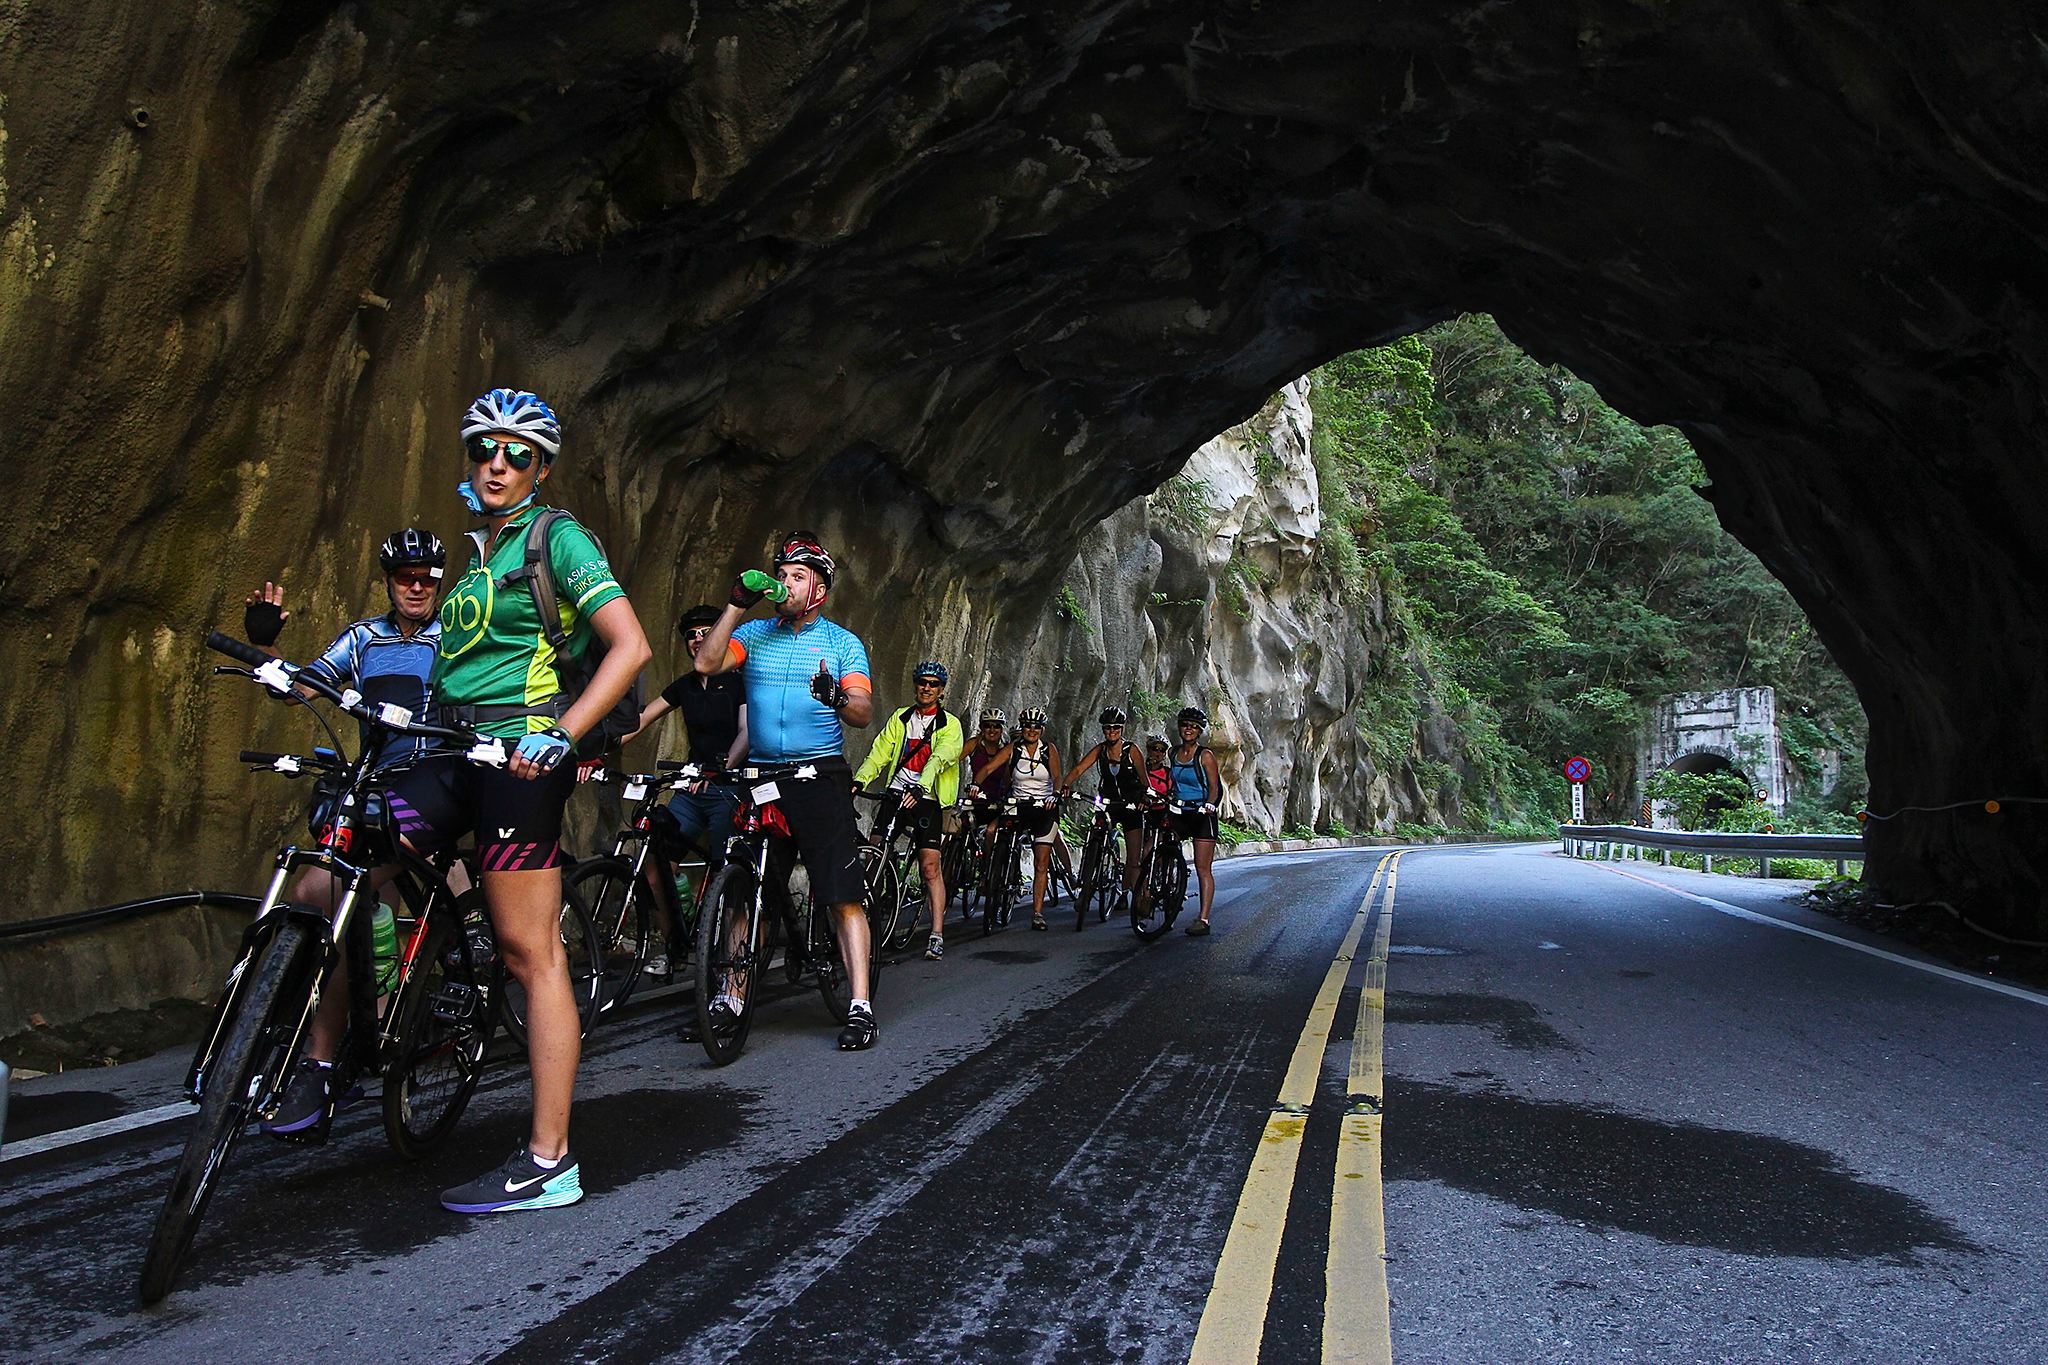 Cyclists stopping for a break in a tunnel in Taiwan